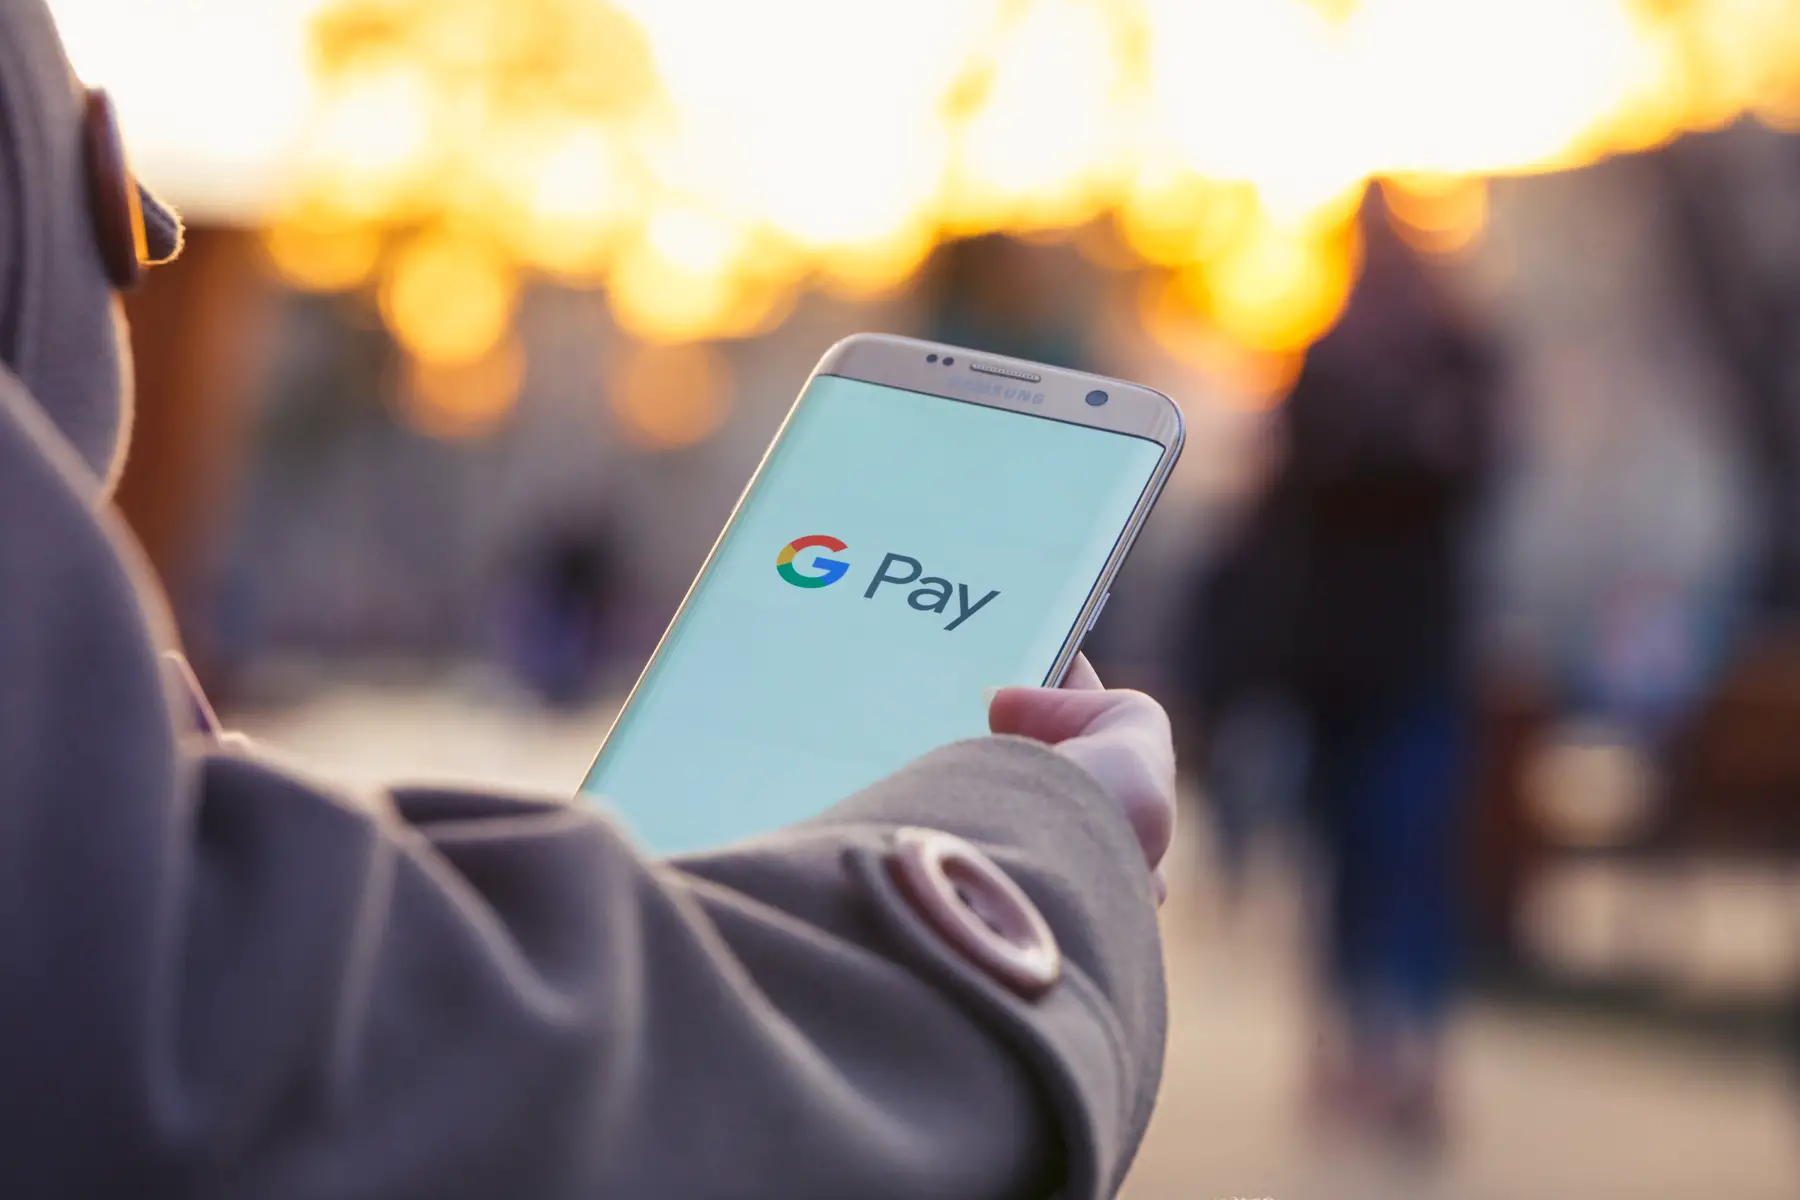 Using Google Pay on a phone